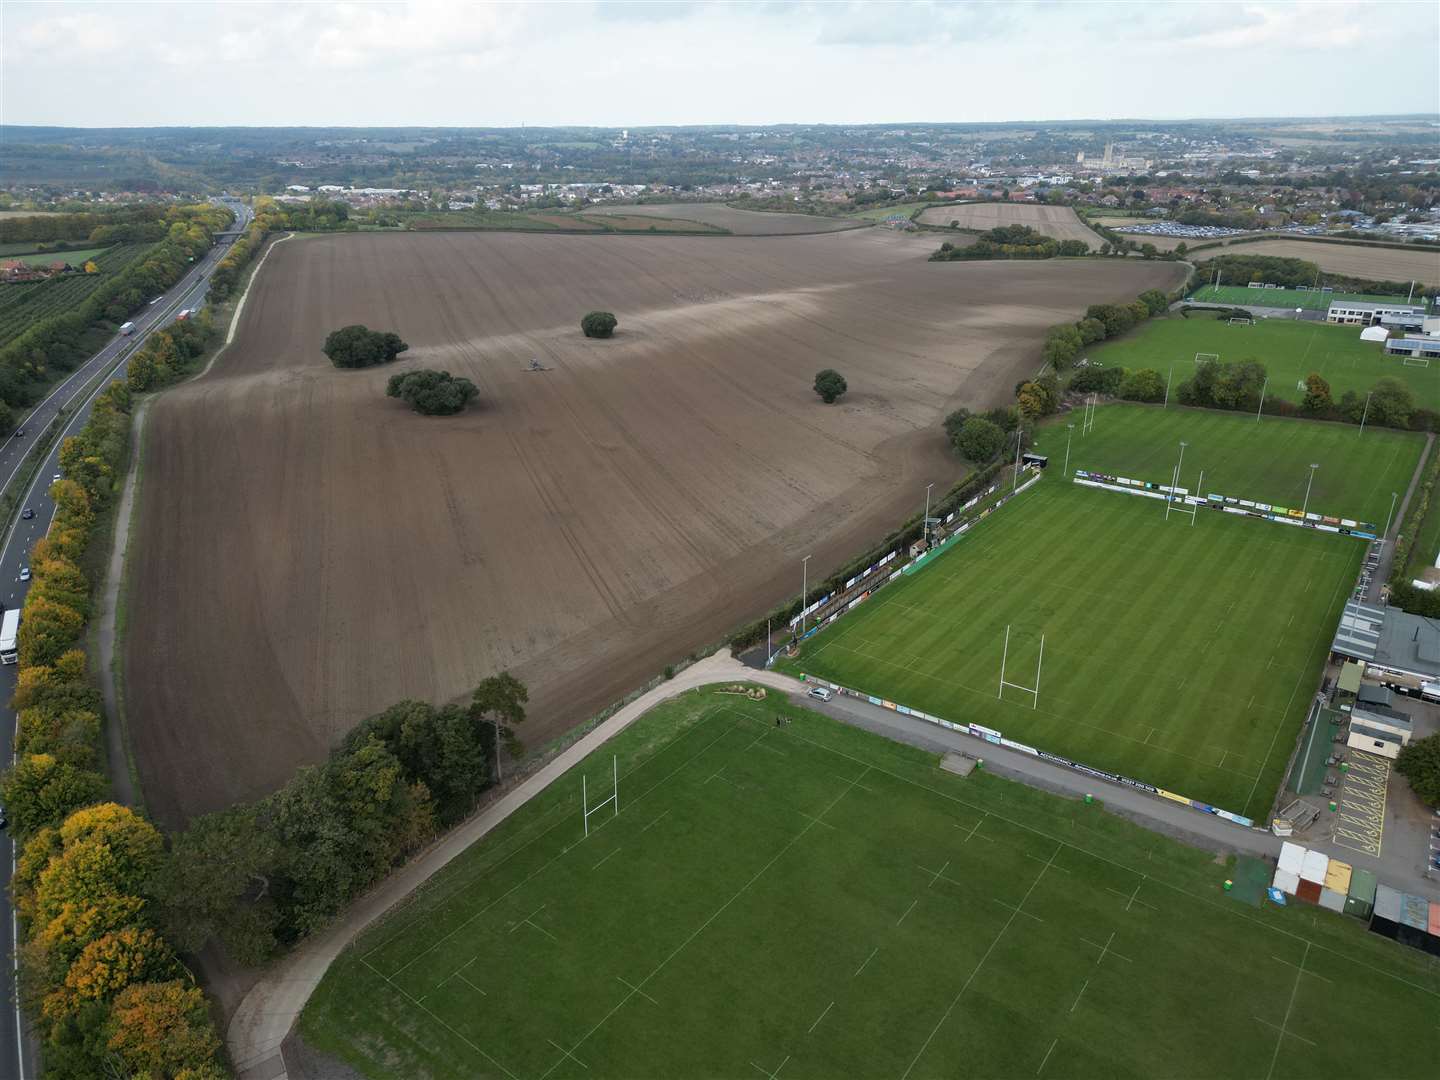 Merton Park will be made of 2,075 homes. Picture: Barry Goodwin